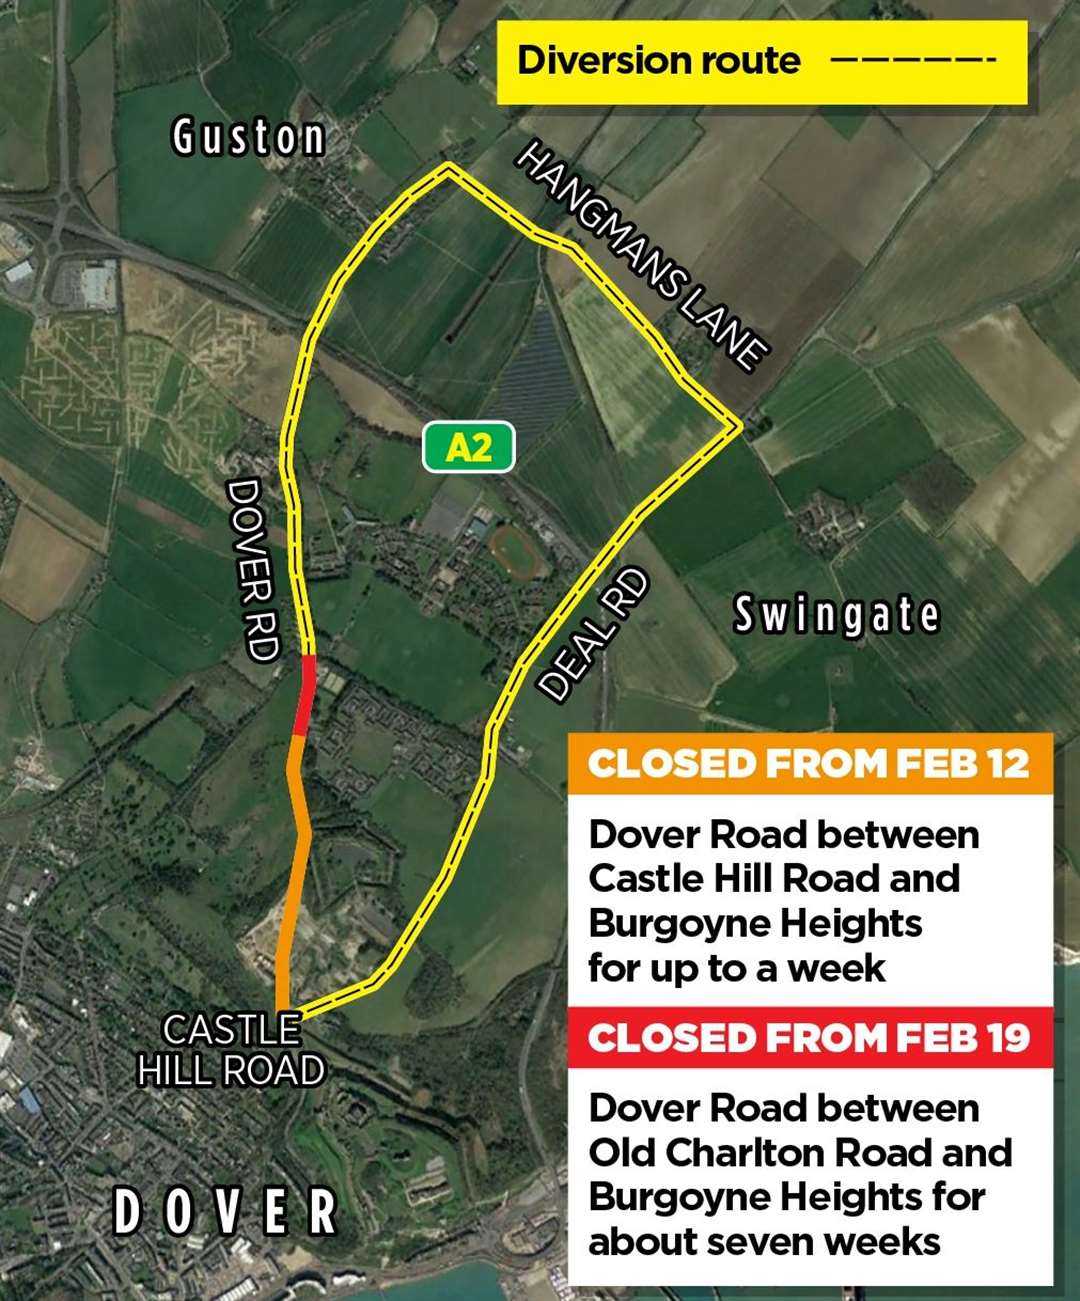 The area of Dover Road, Guston, affected by road closures and the recommended diversion route